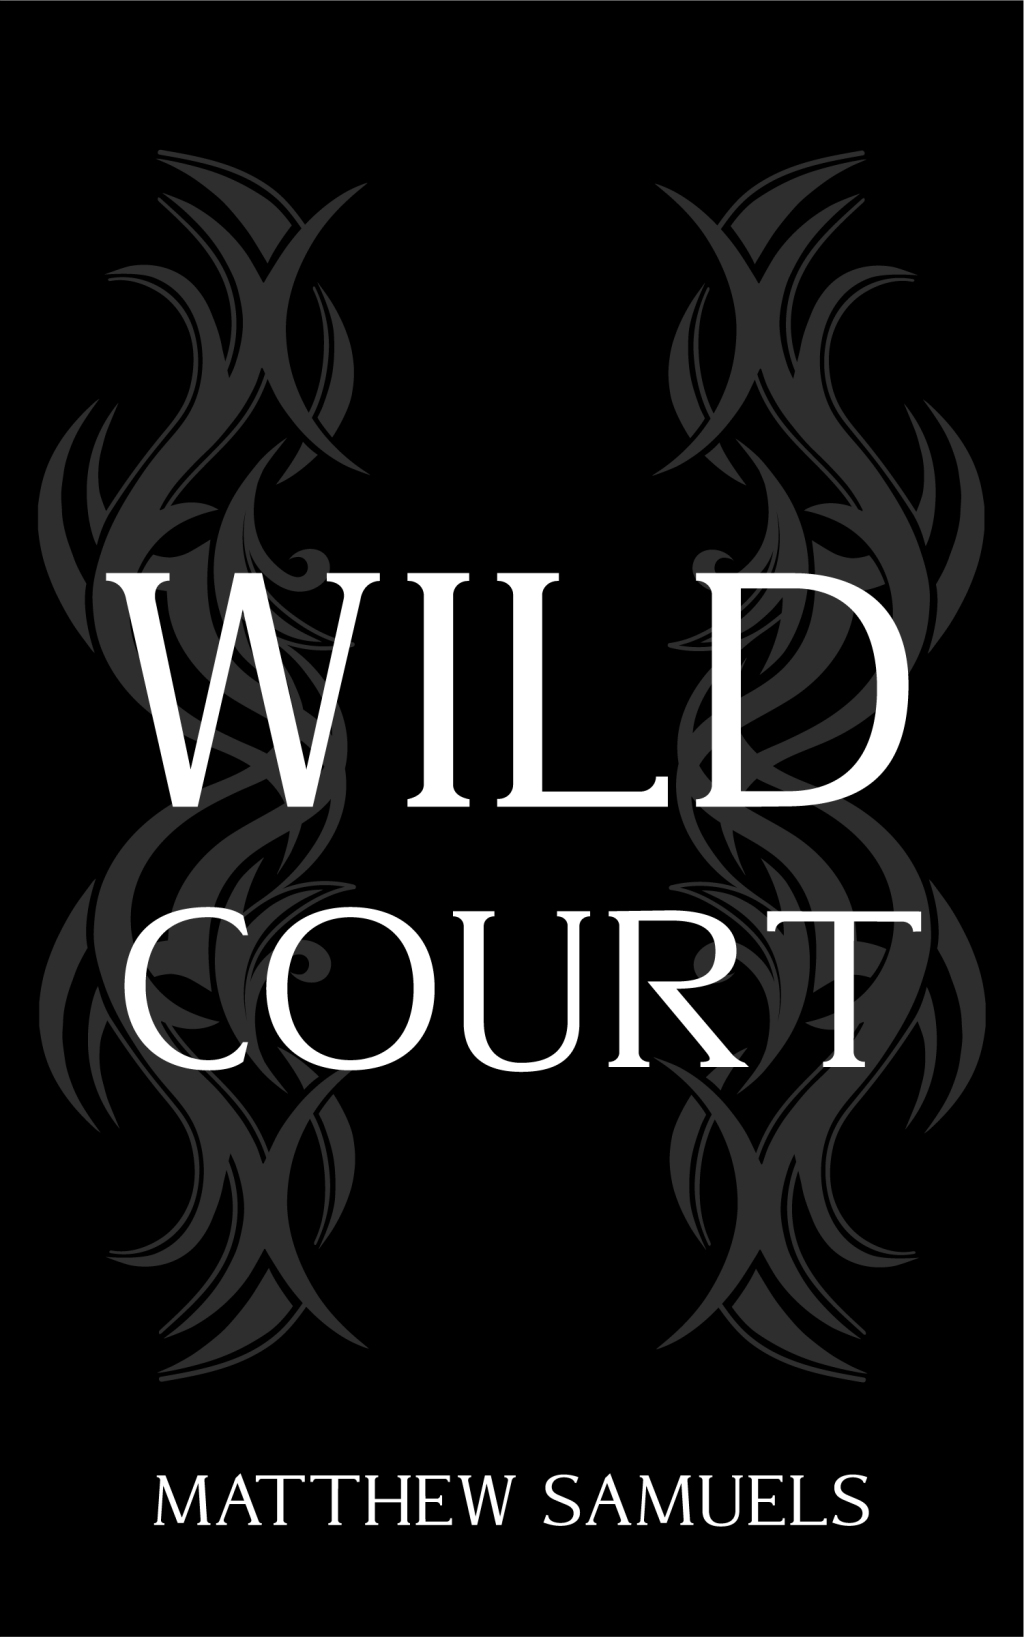 Welcome to the Wild Court, a Well-Written Reminder: Kindness is a Virtue